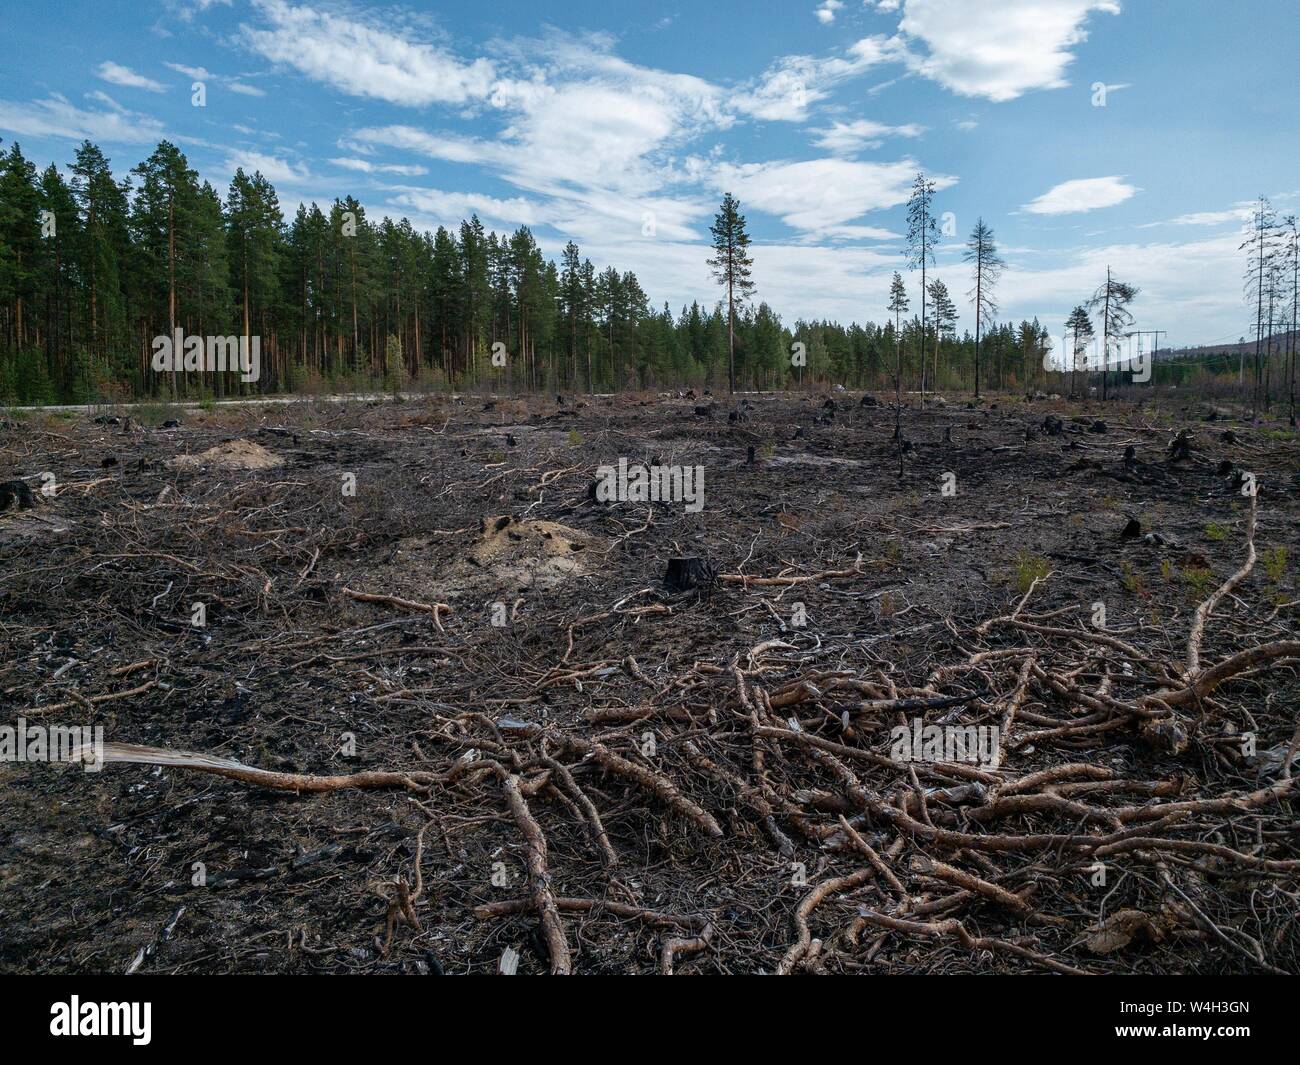 Forest fire aftermath with burnt trees and stump. Field with ashes after a wildfire. Stock Photo